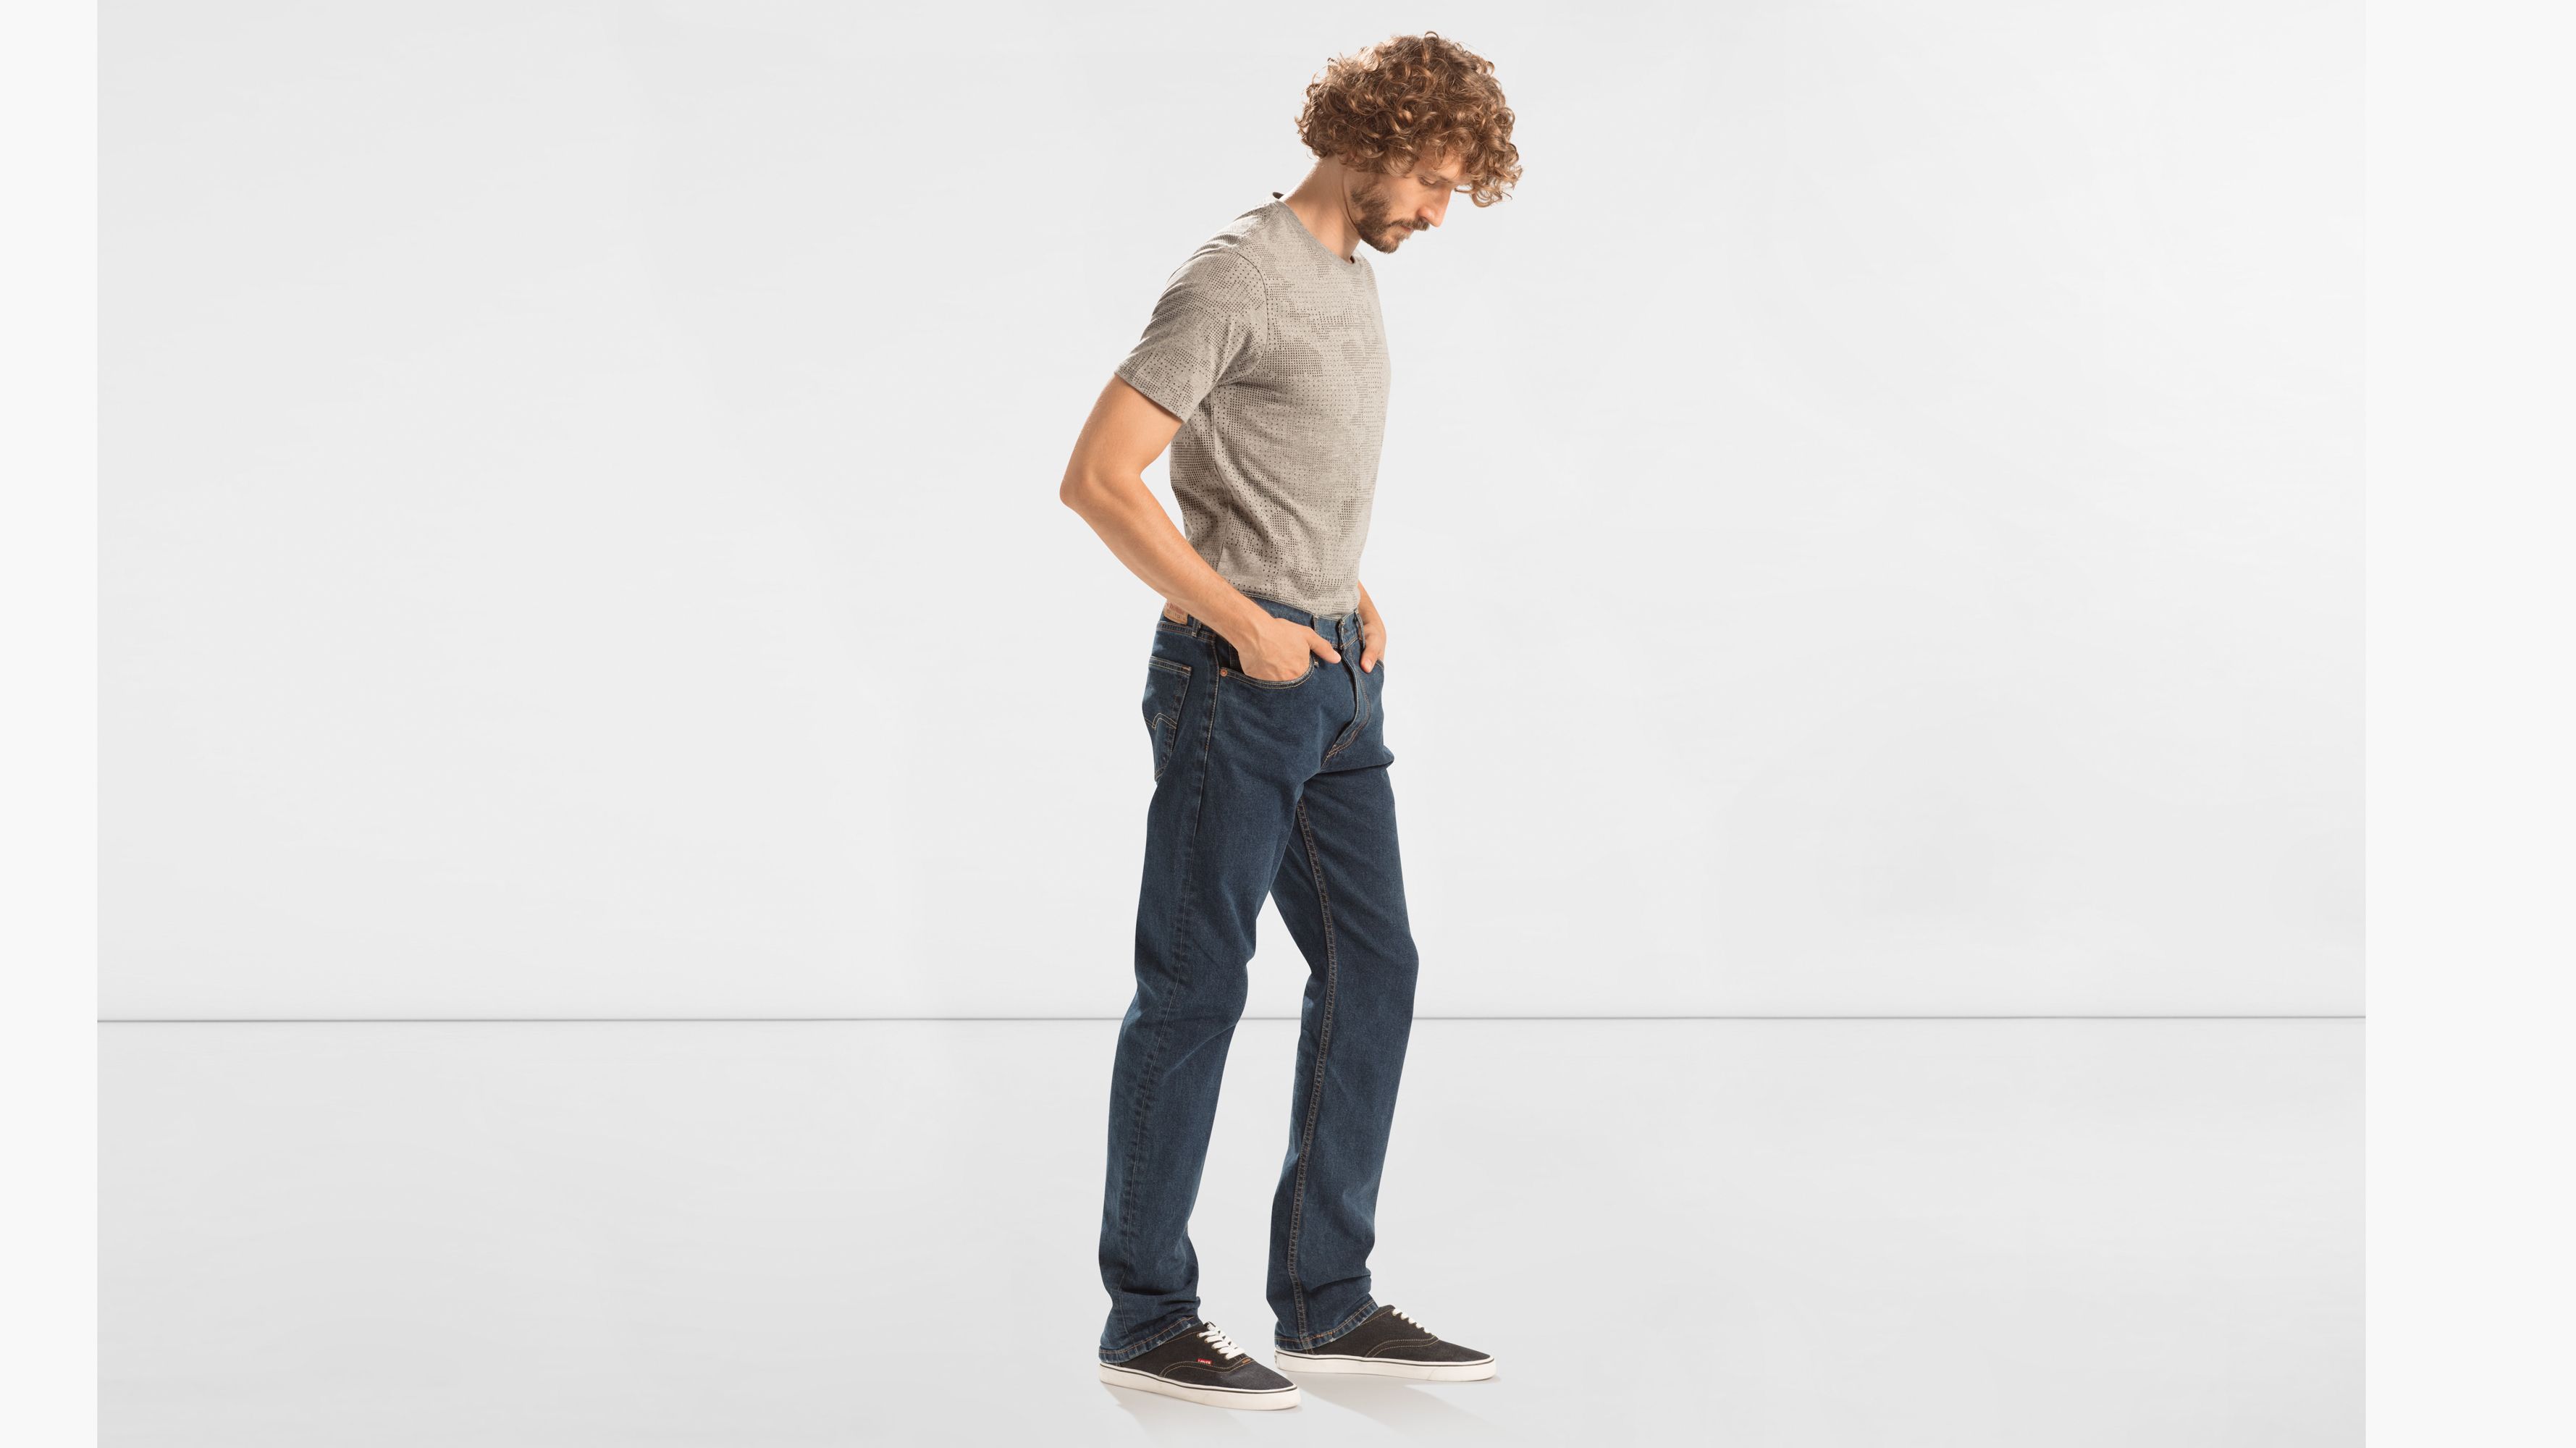 levis online shopping